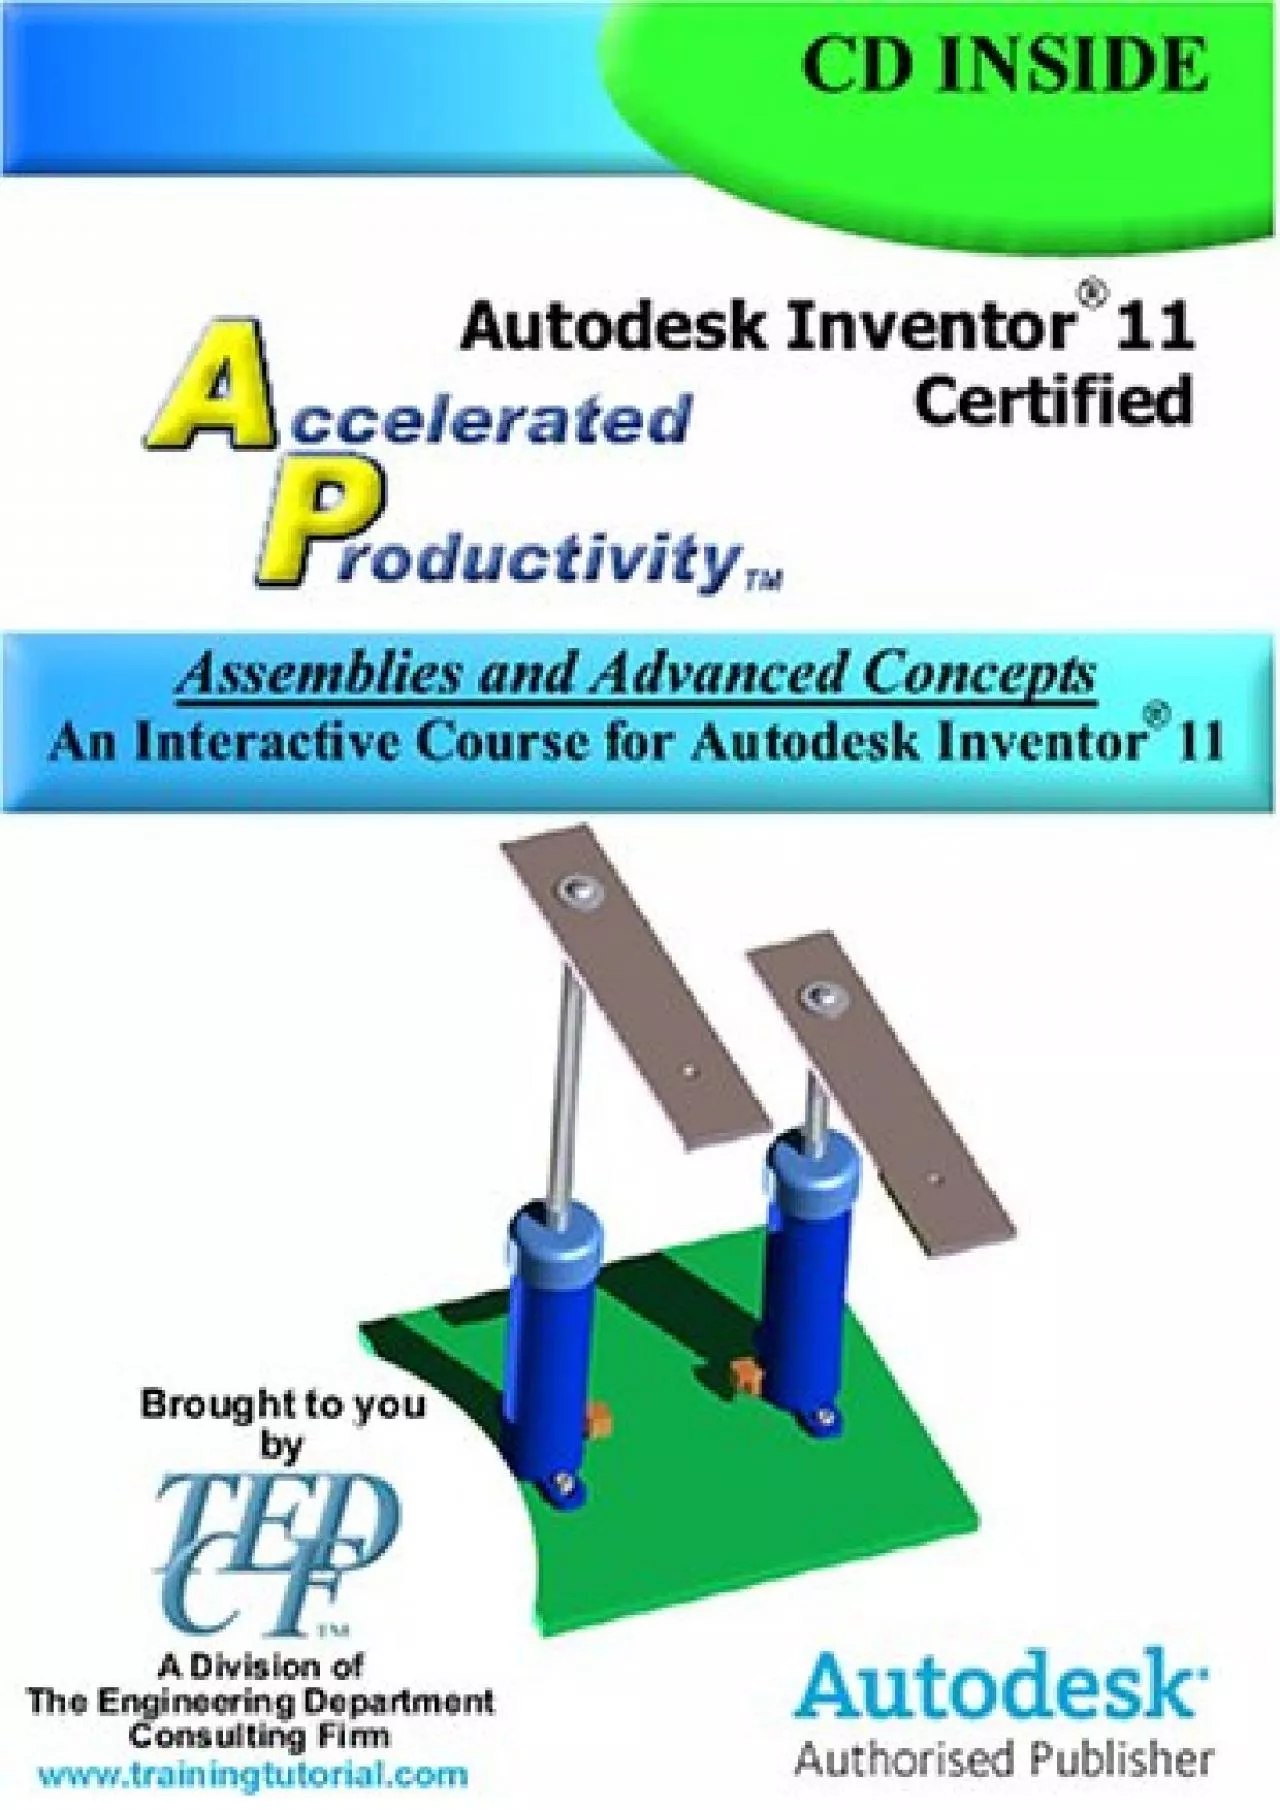 [DOWLOAD]-Autodesk Inventor 11 Accelerated Productivity: Assemblies and Advanced Concepts,